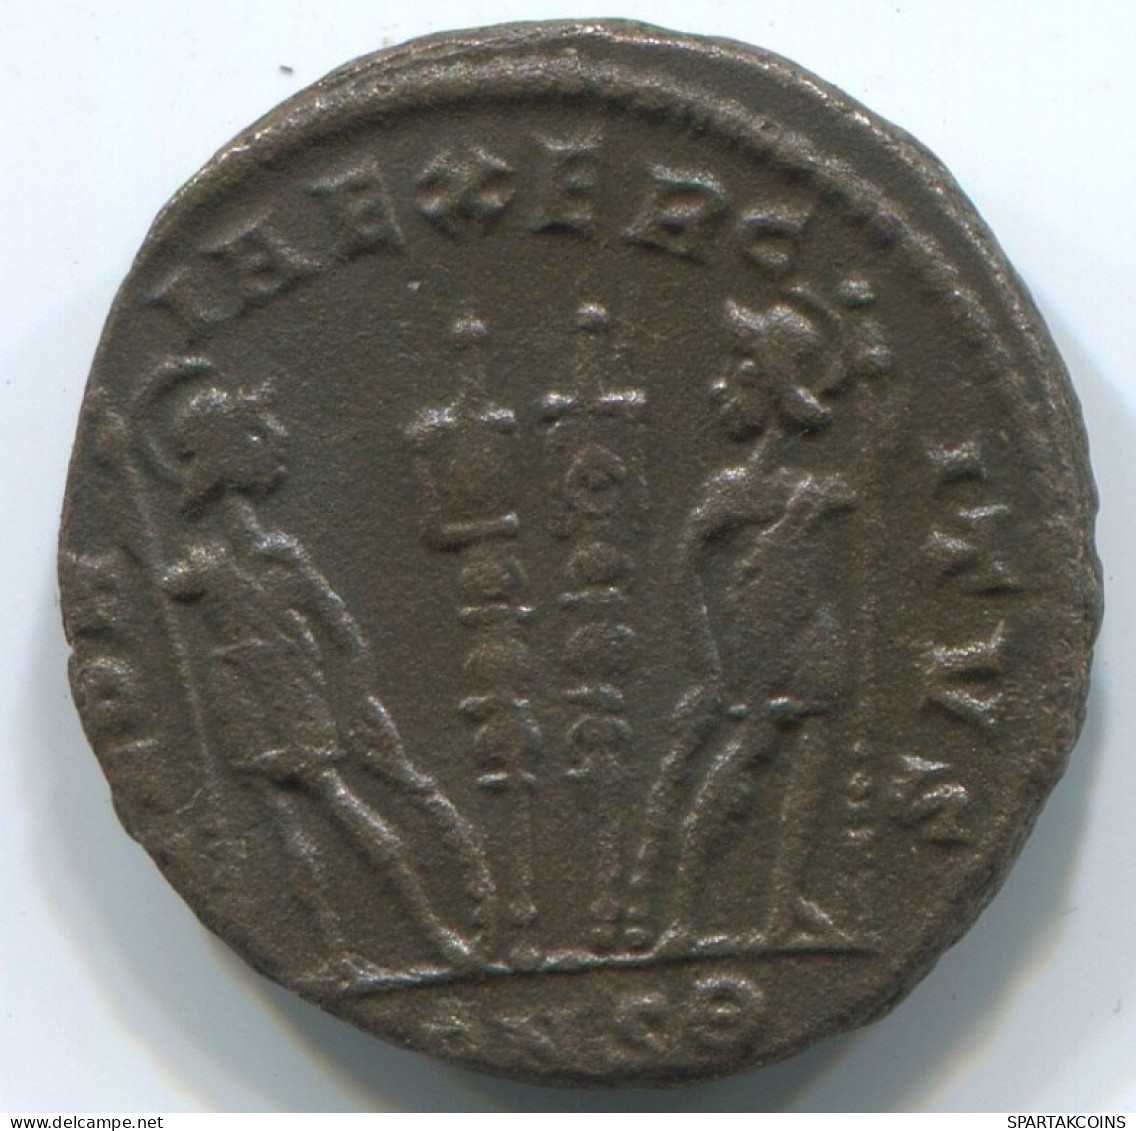 LATE ROMAN EMPIRE Pièce Antique Authentique Roman Pièce 2.1g/18mm #ANT2270.14.F.A - The End Of Empire (363 AD To 476 AD)